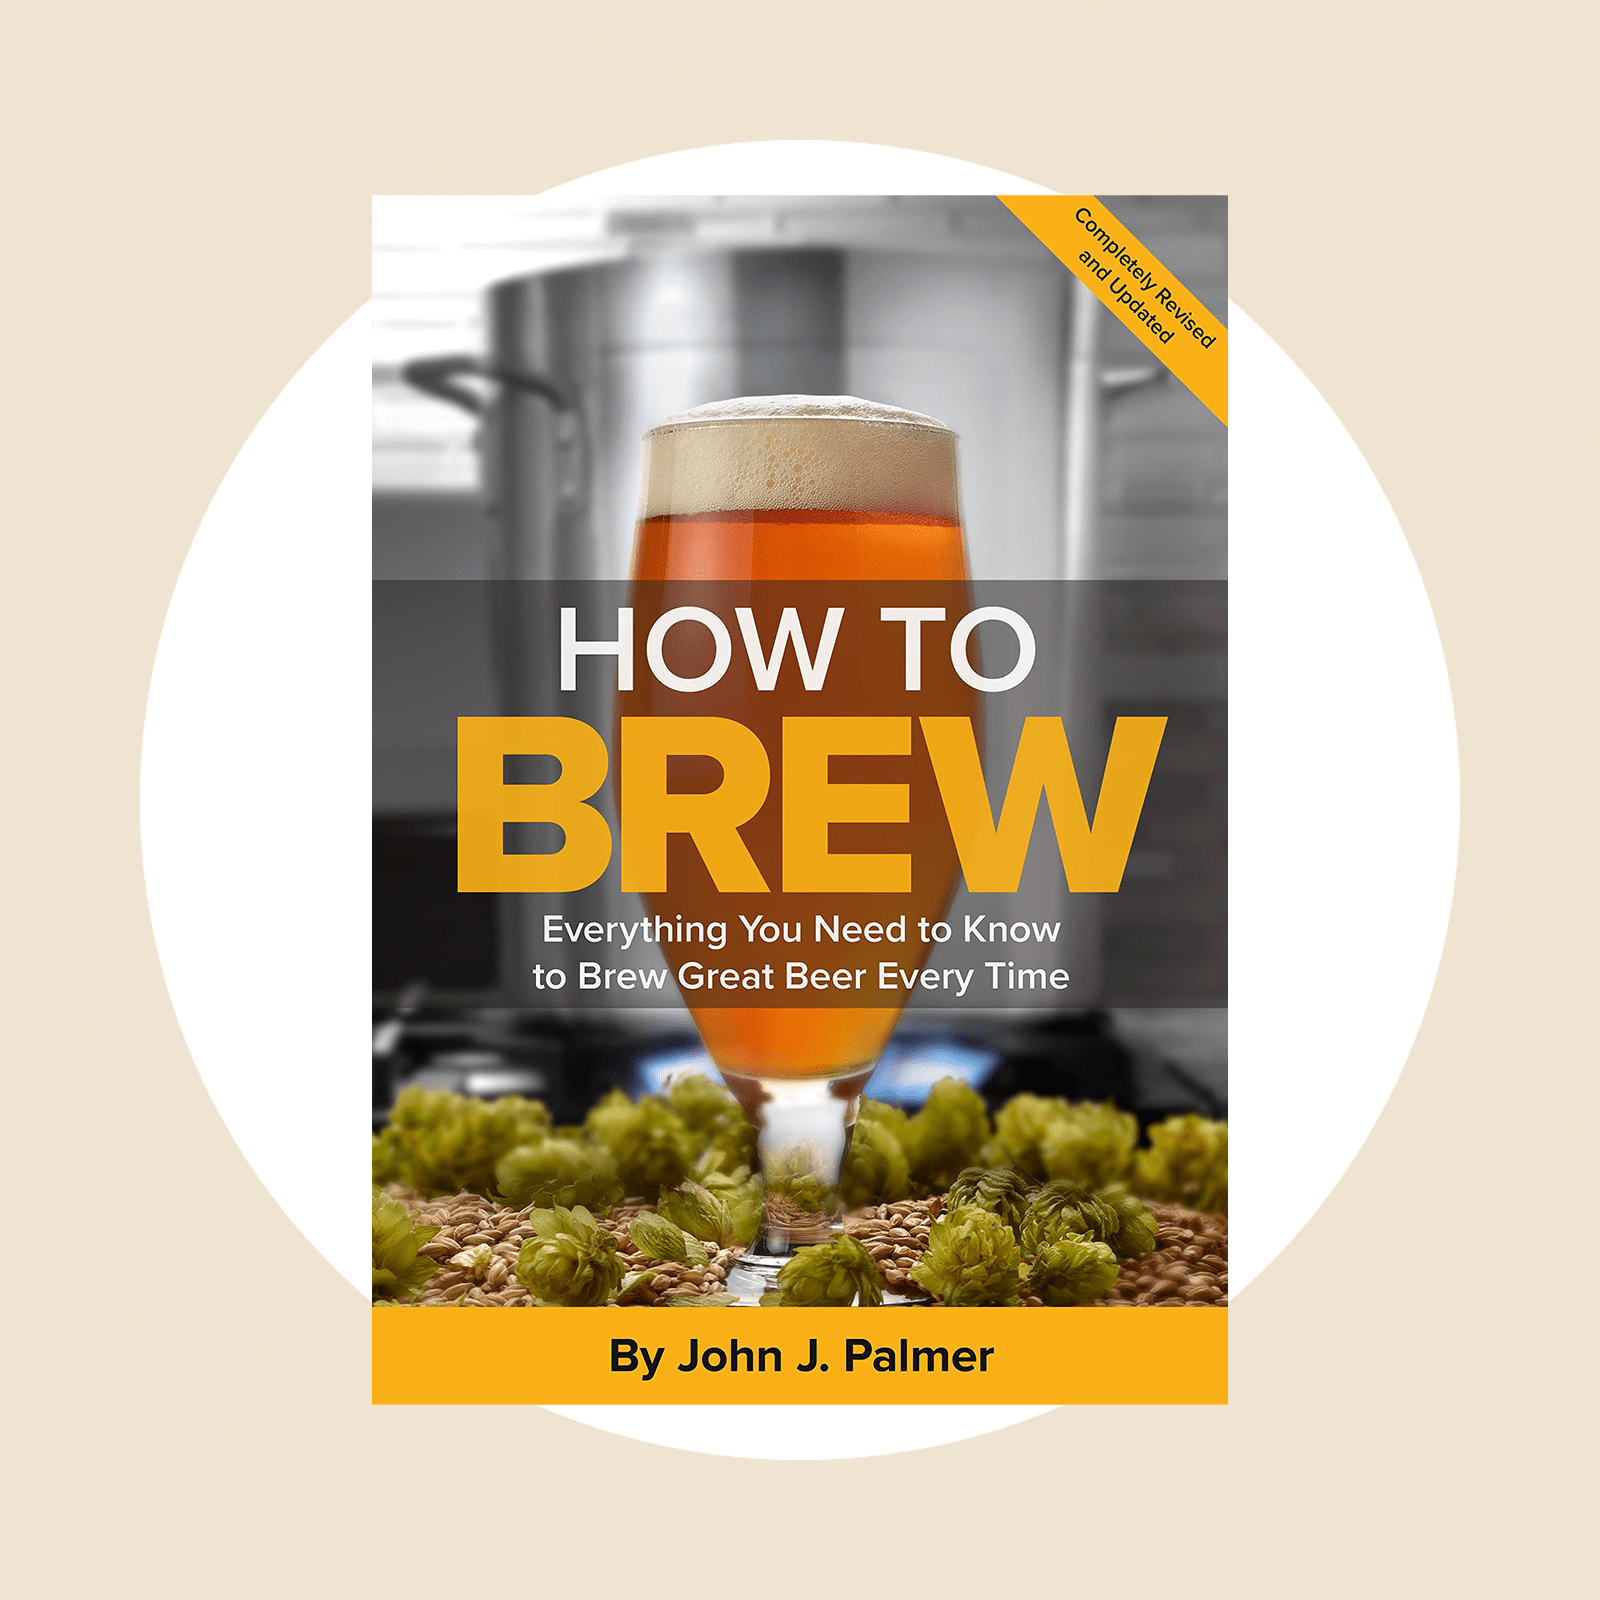 https://www.tasteofhome.com/wp-content/uploads/2021/10/how-to-brew-ecomm-via-amazon.com_.png?fit=700%2C700